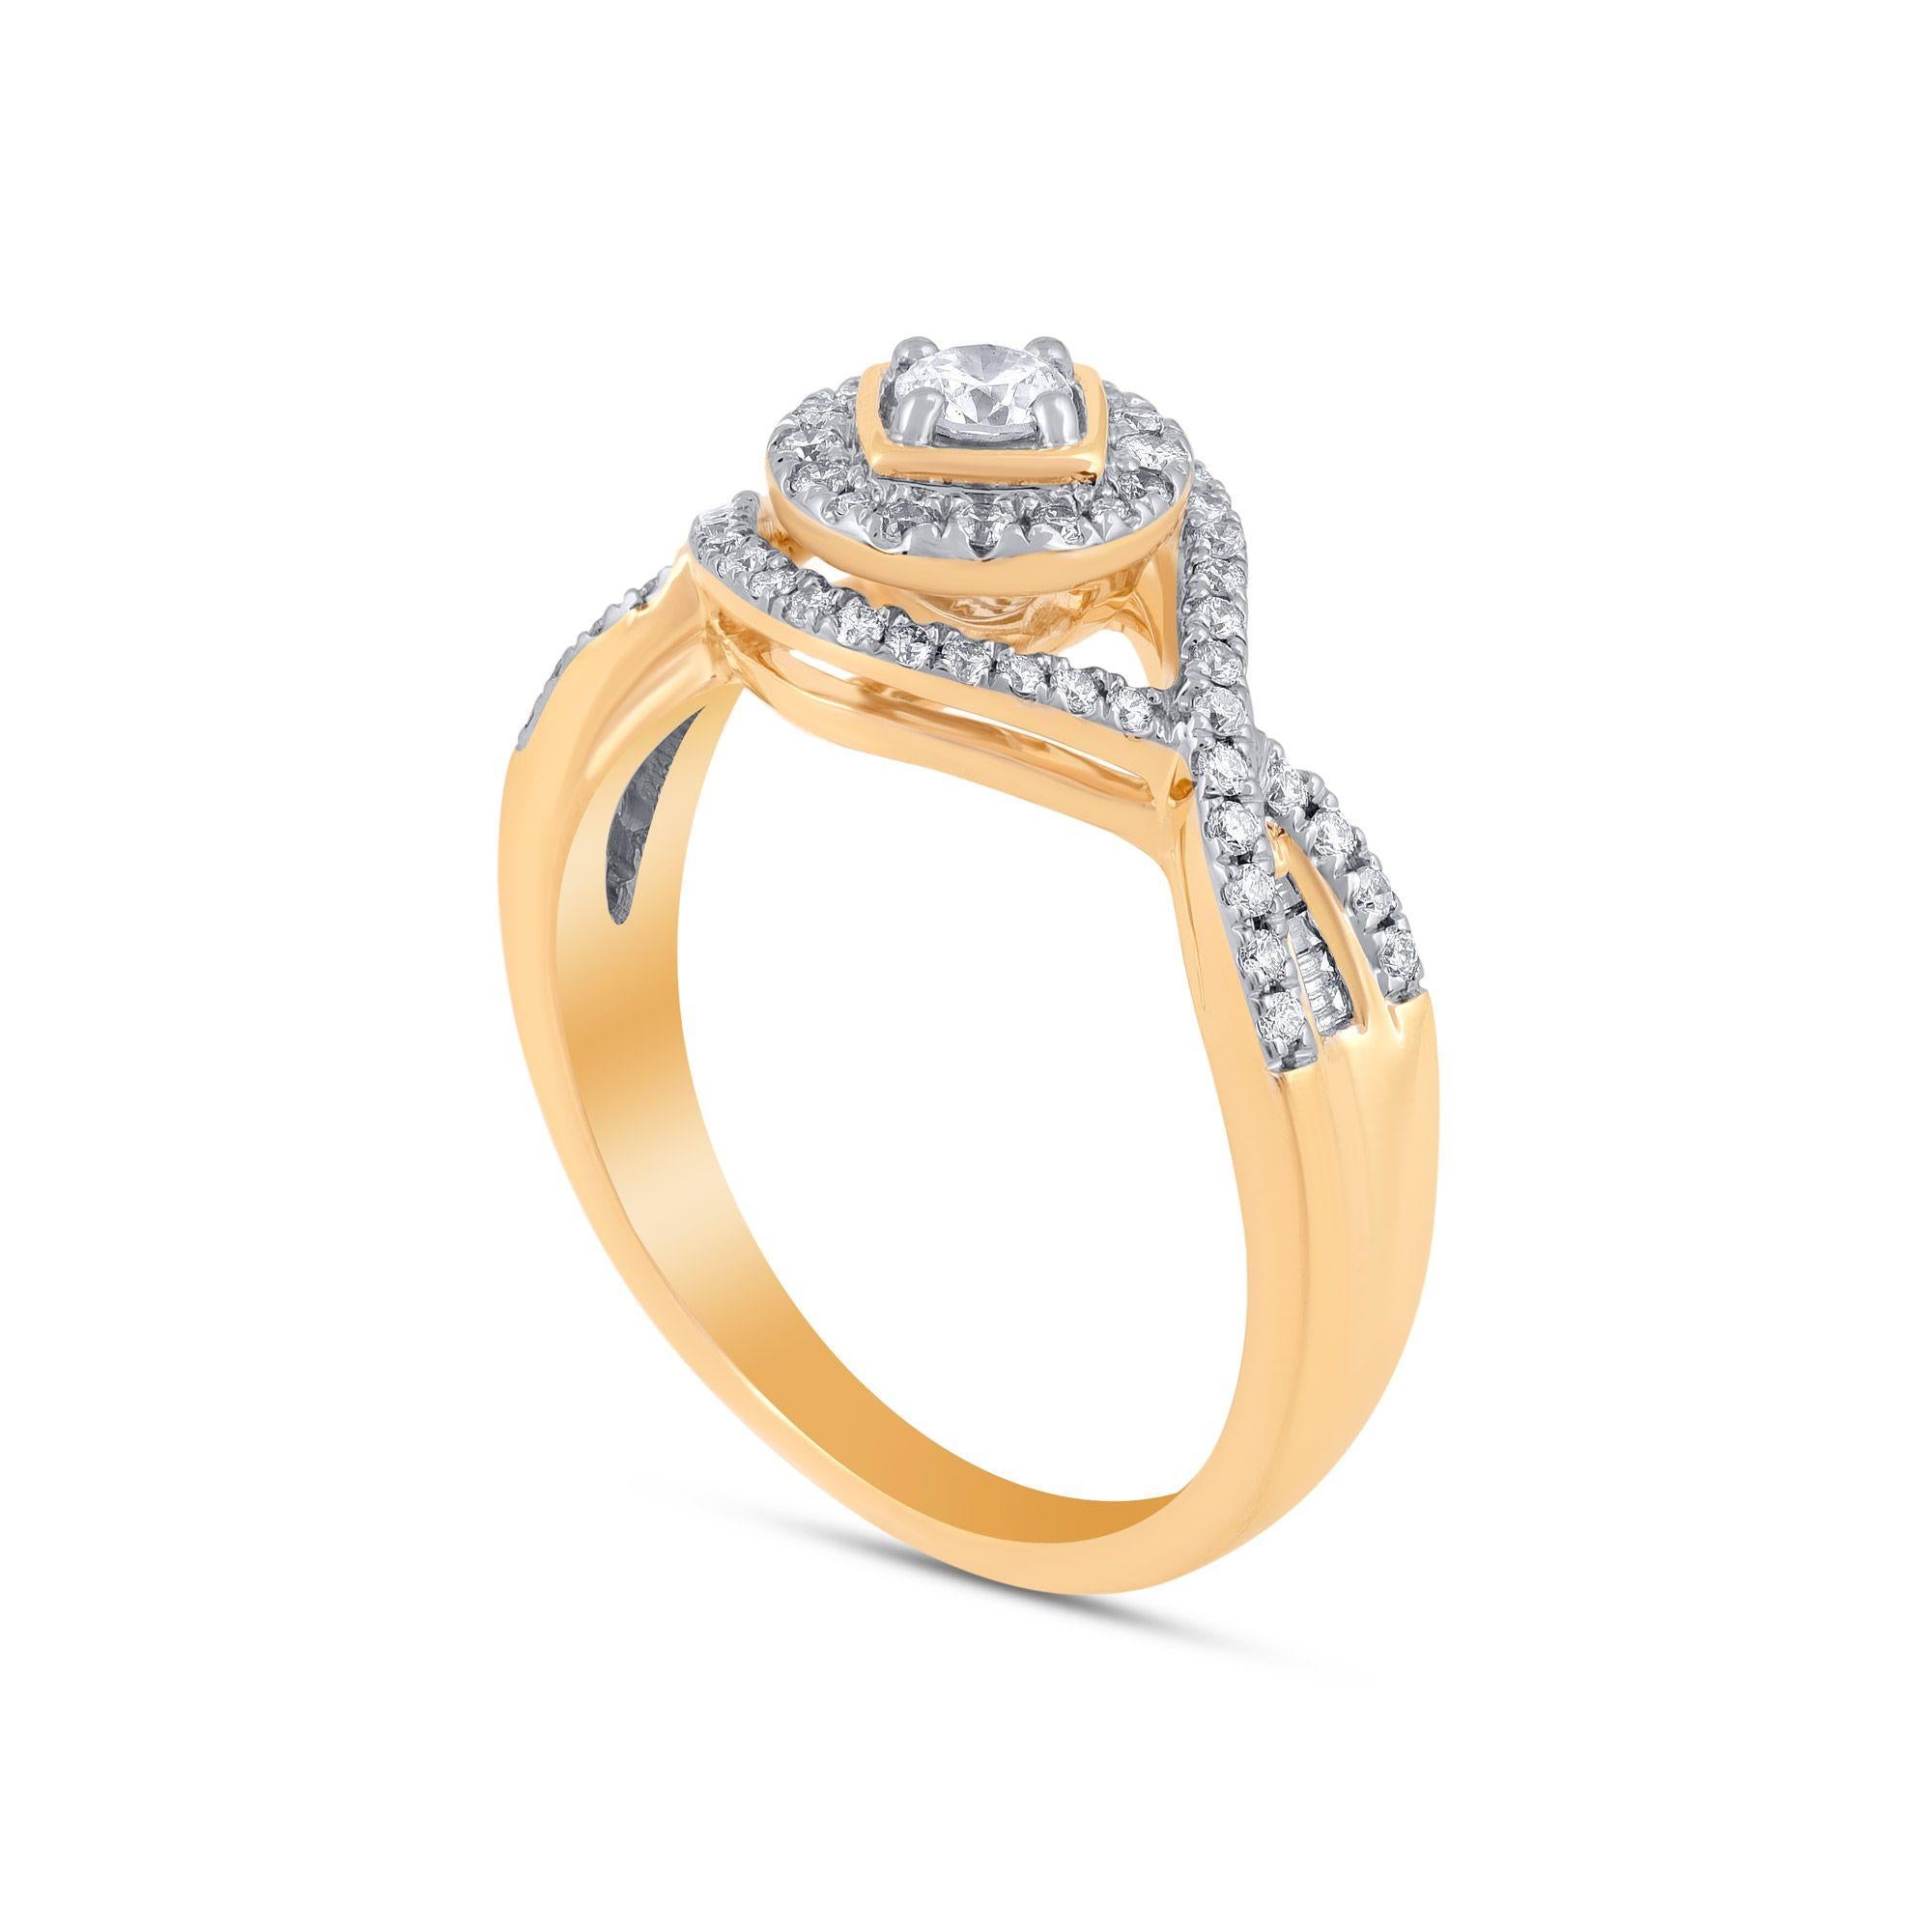 A beautiful Engagement Ring with 71 diamonds in prong, micropave and channel setting. Crafted in 14KT gold, diamonds are graded I-J Color, I1-I2 Clarity. 
